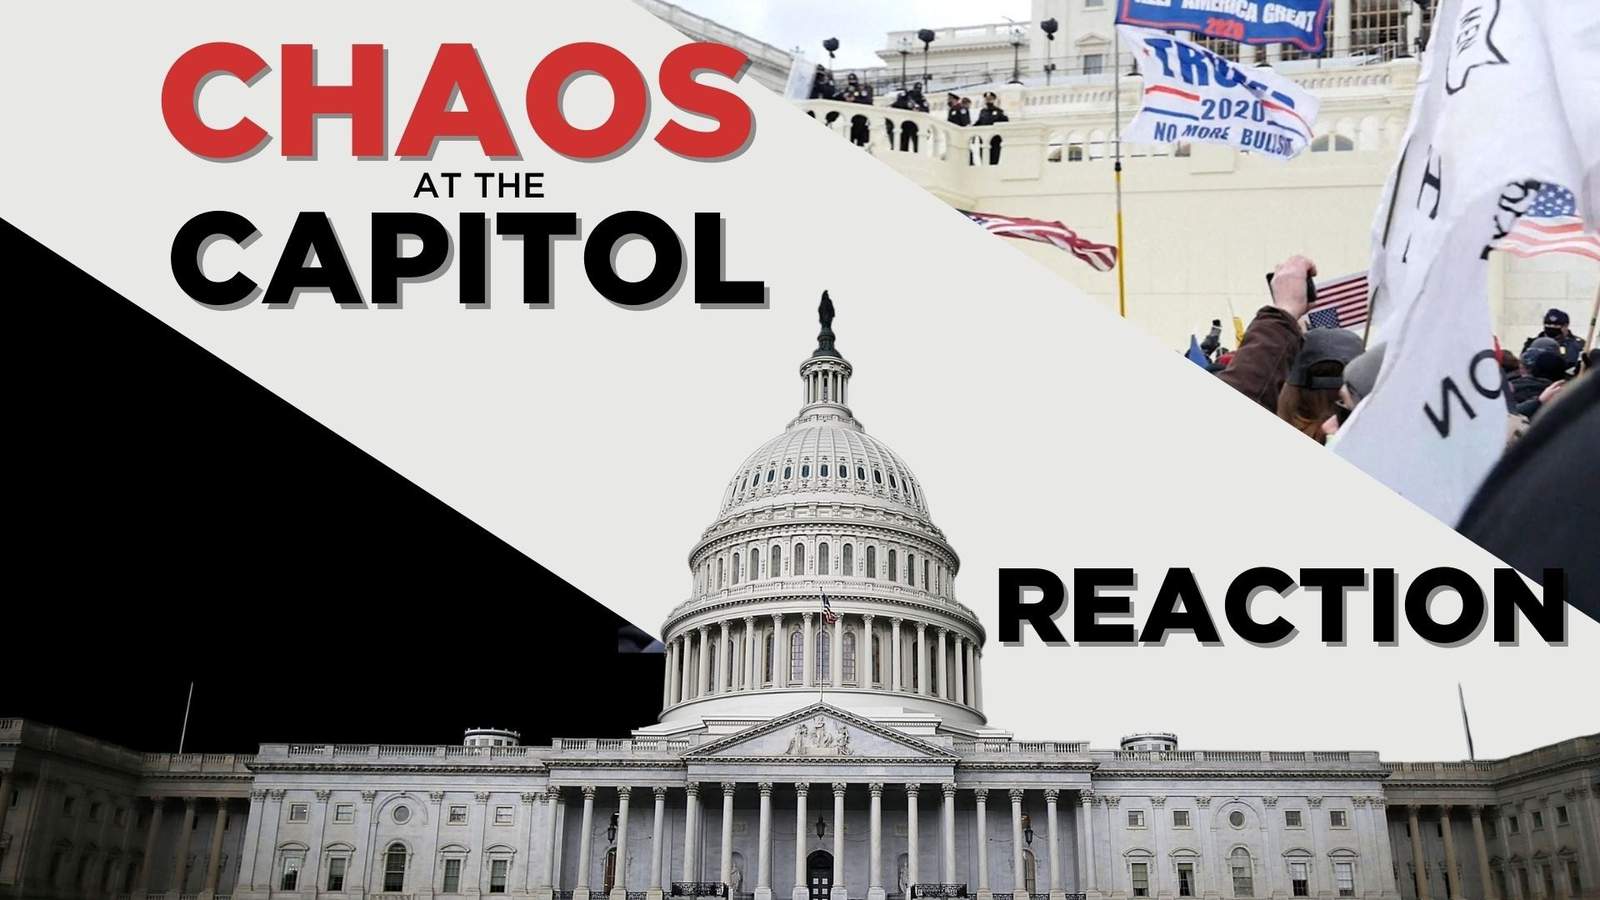 Texas lawmakers in Washington D.C. react on social media to chaos unfolding at the U.S. Capitol